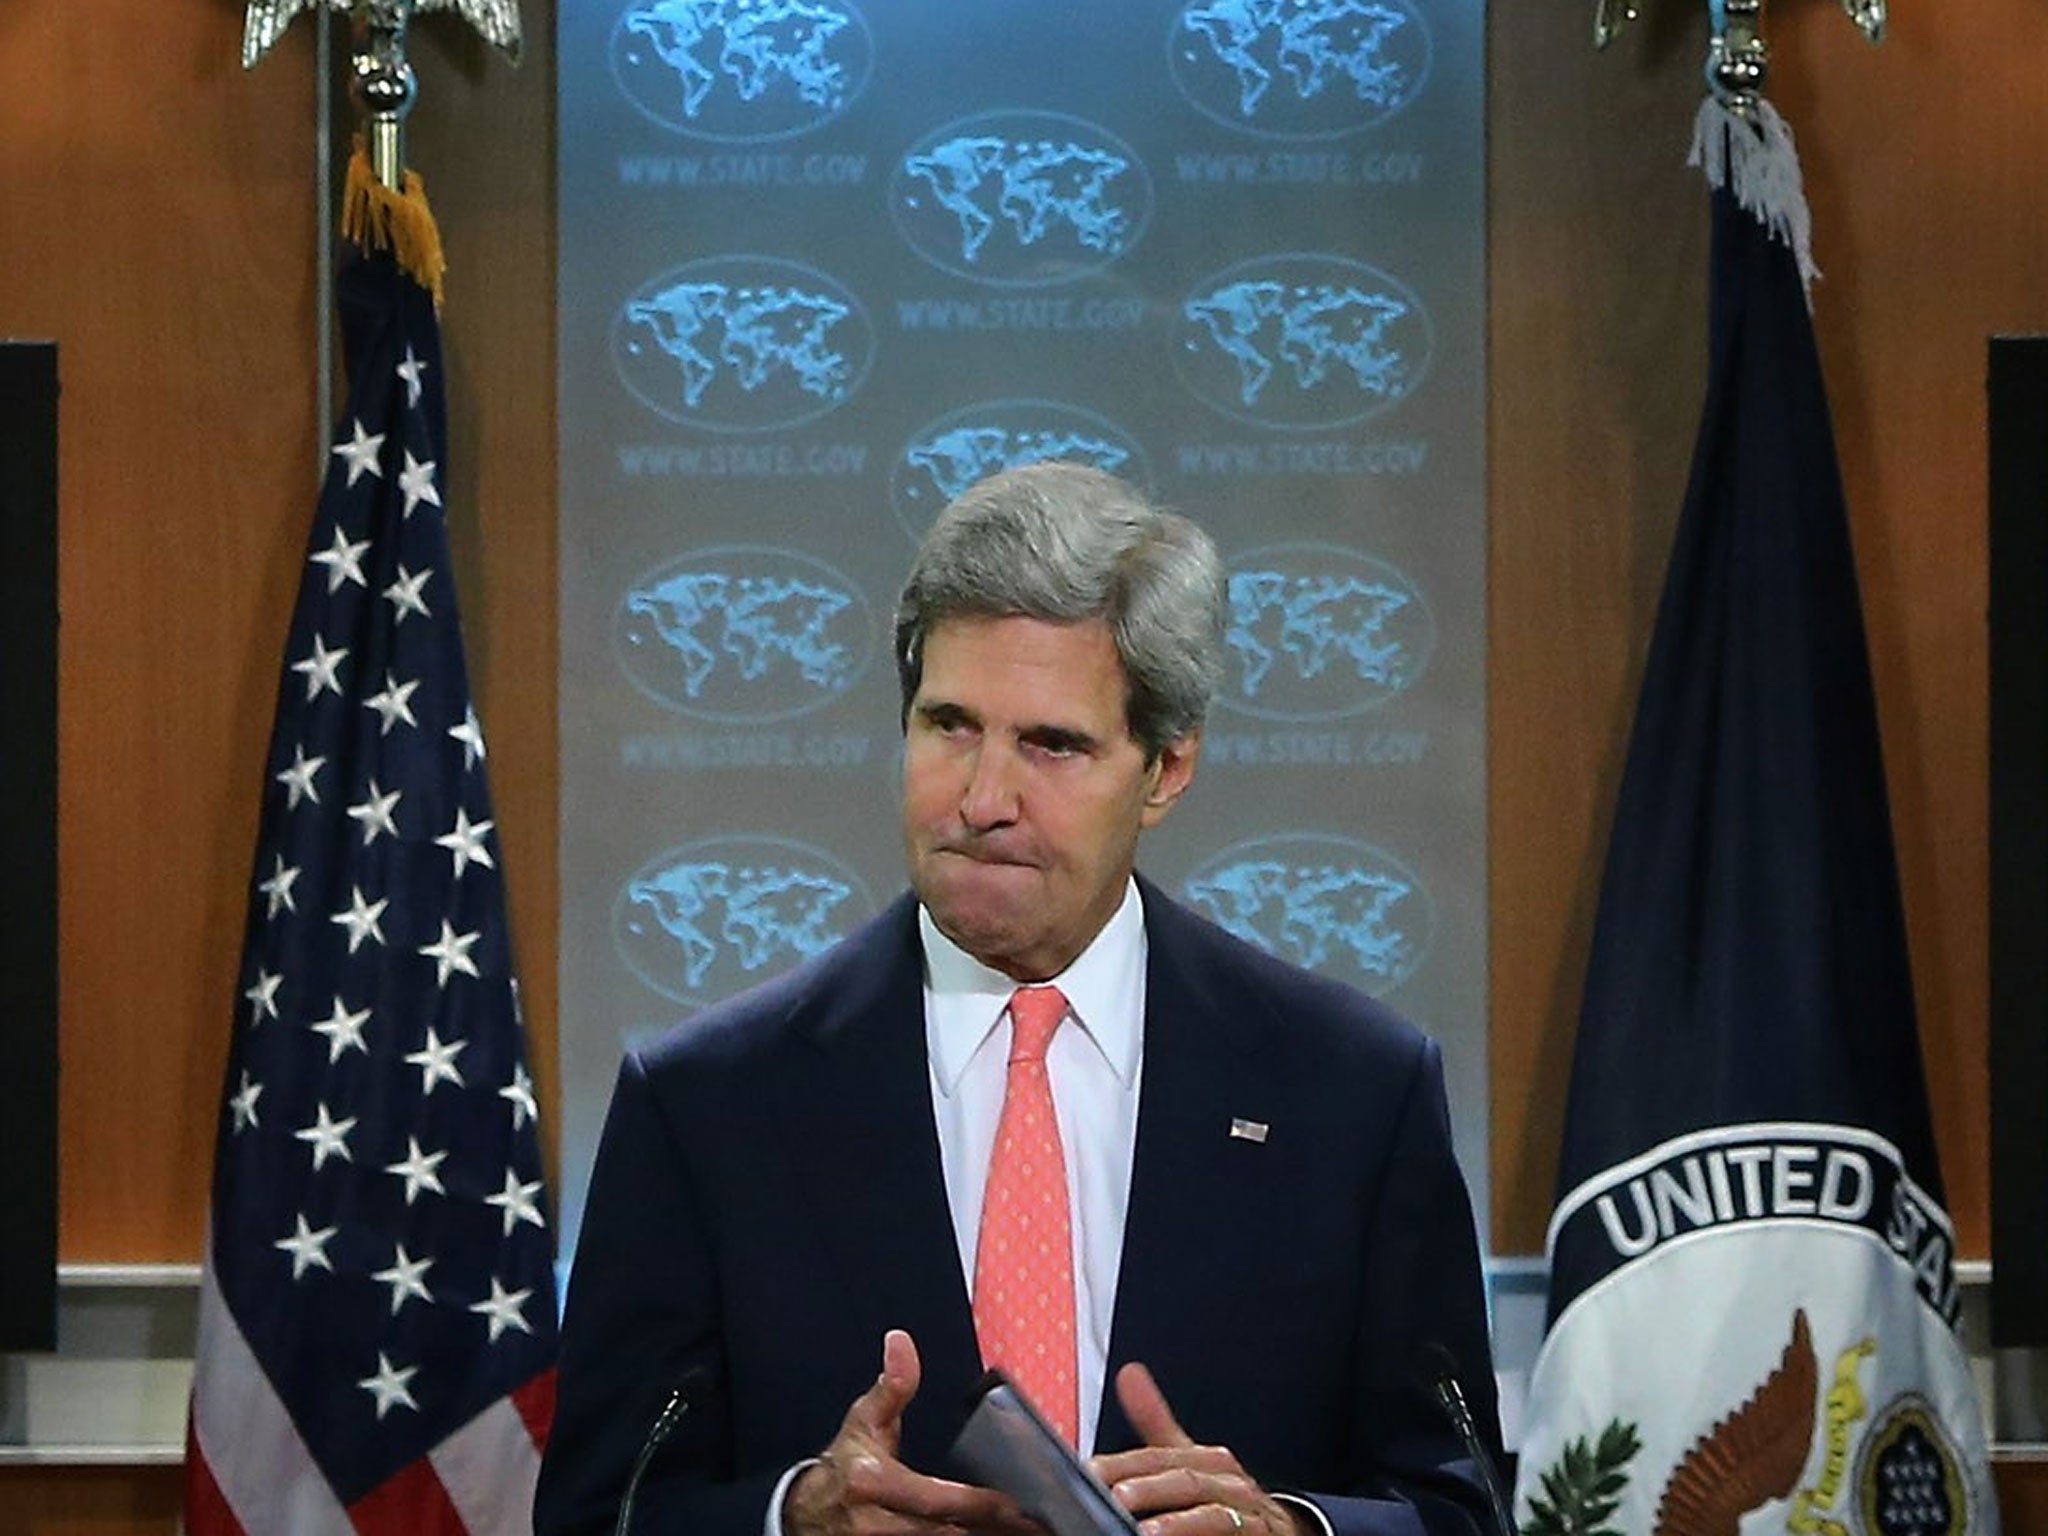 Kerry delivering a statement about the use of chemical weapons in Syria